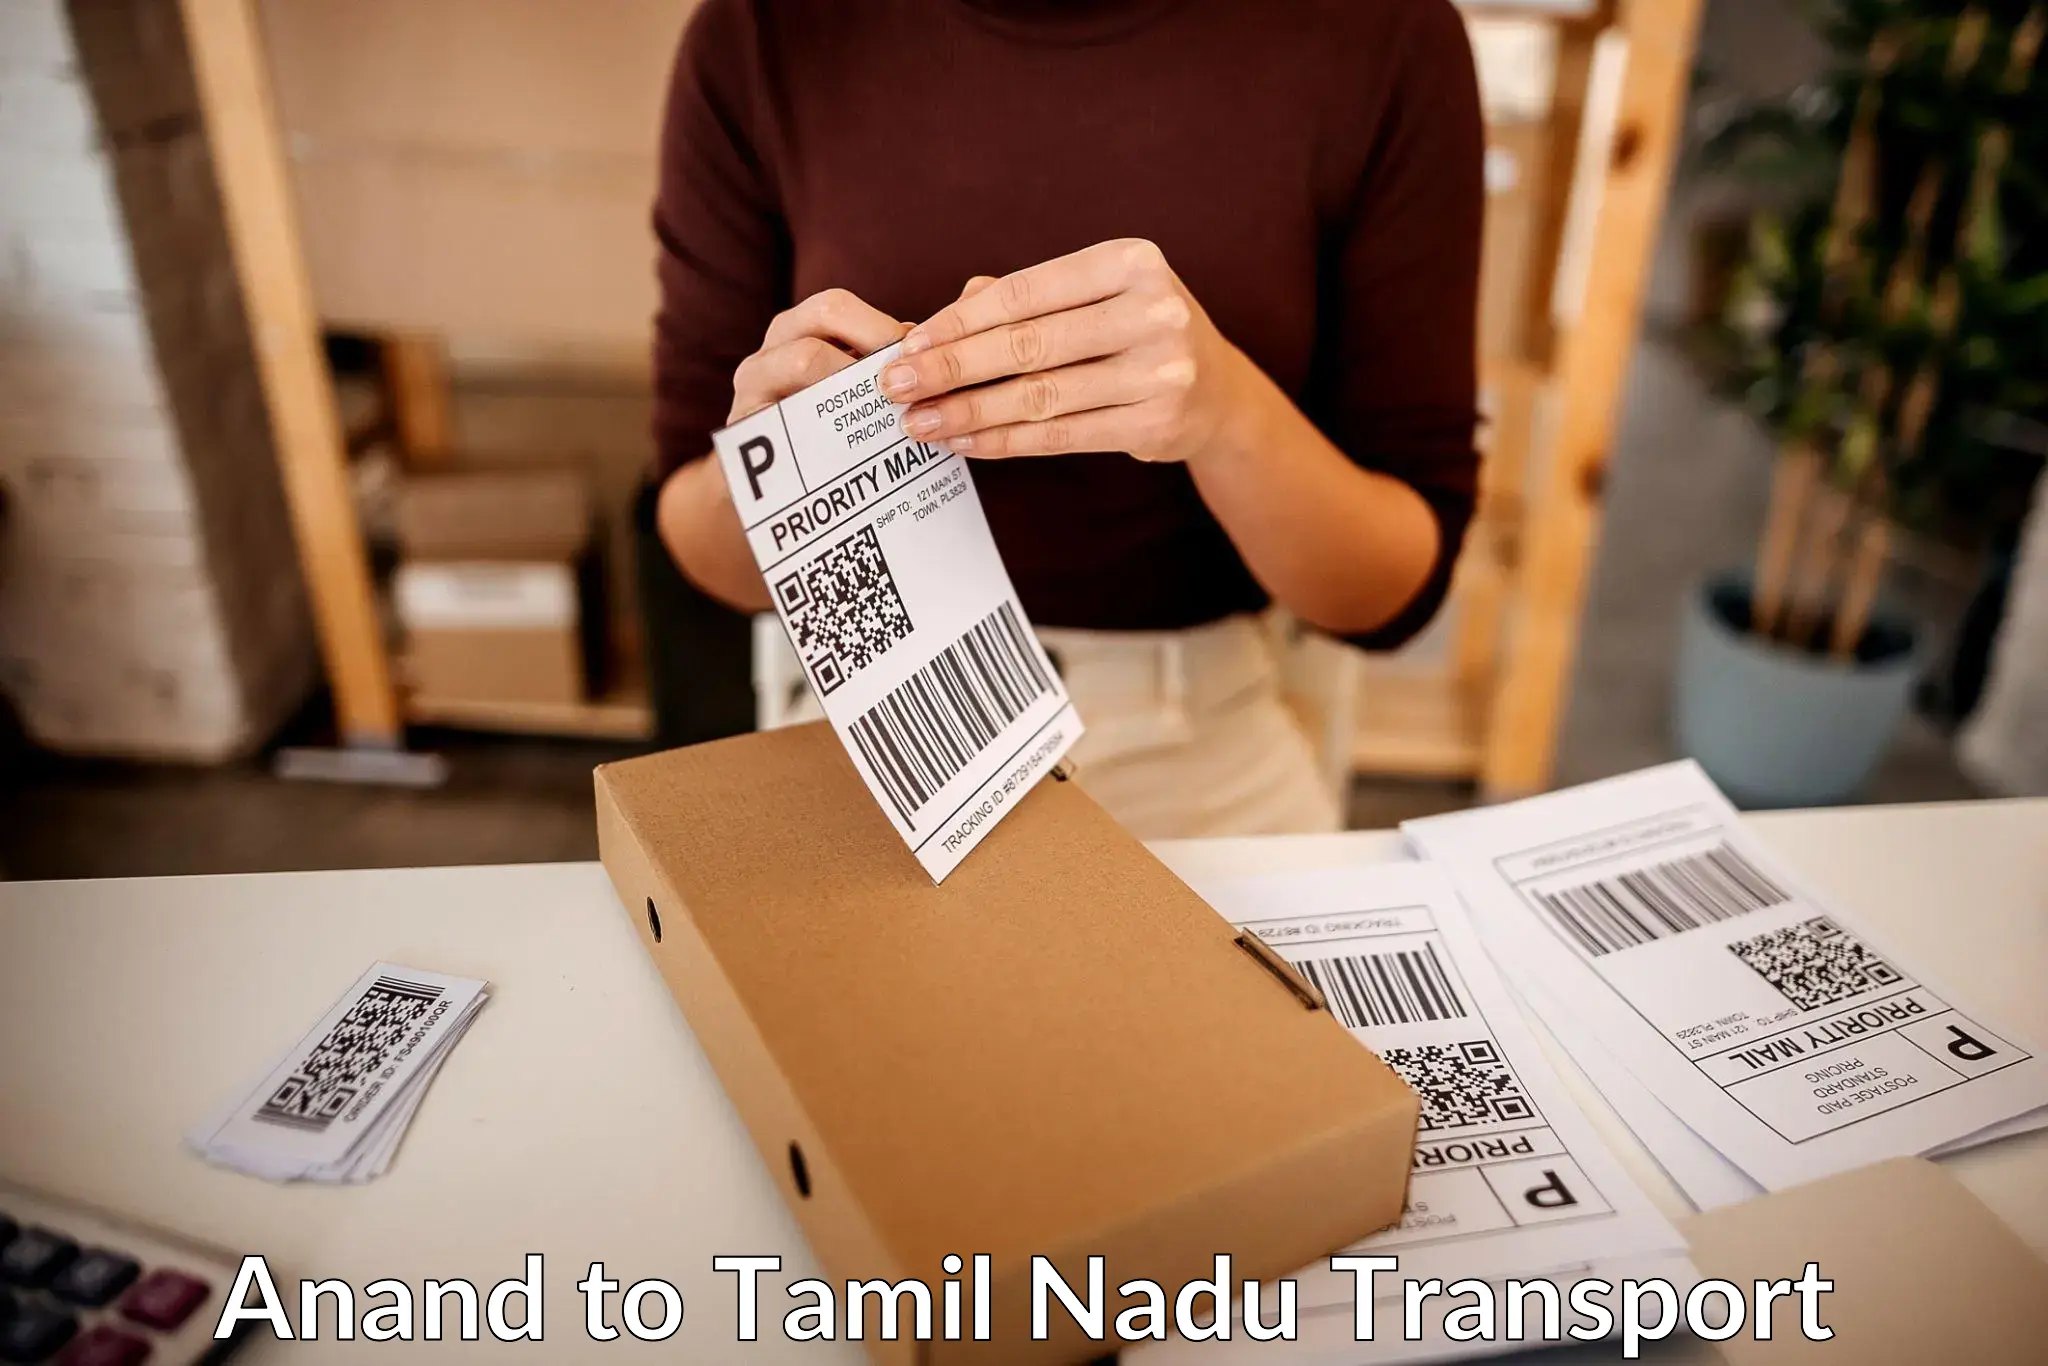 Two wheeler parcel service Anand to Chengalpattu